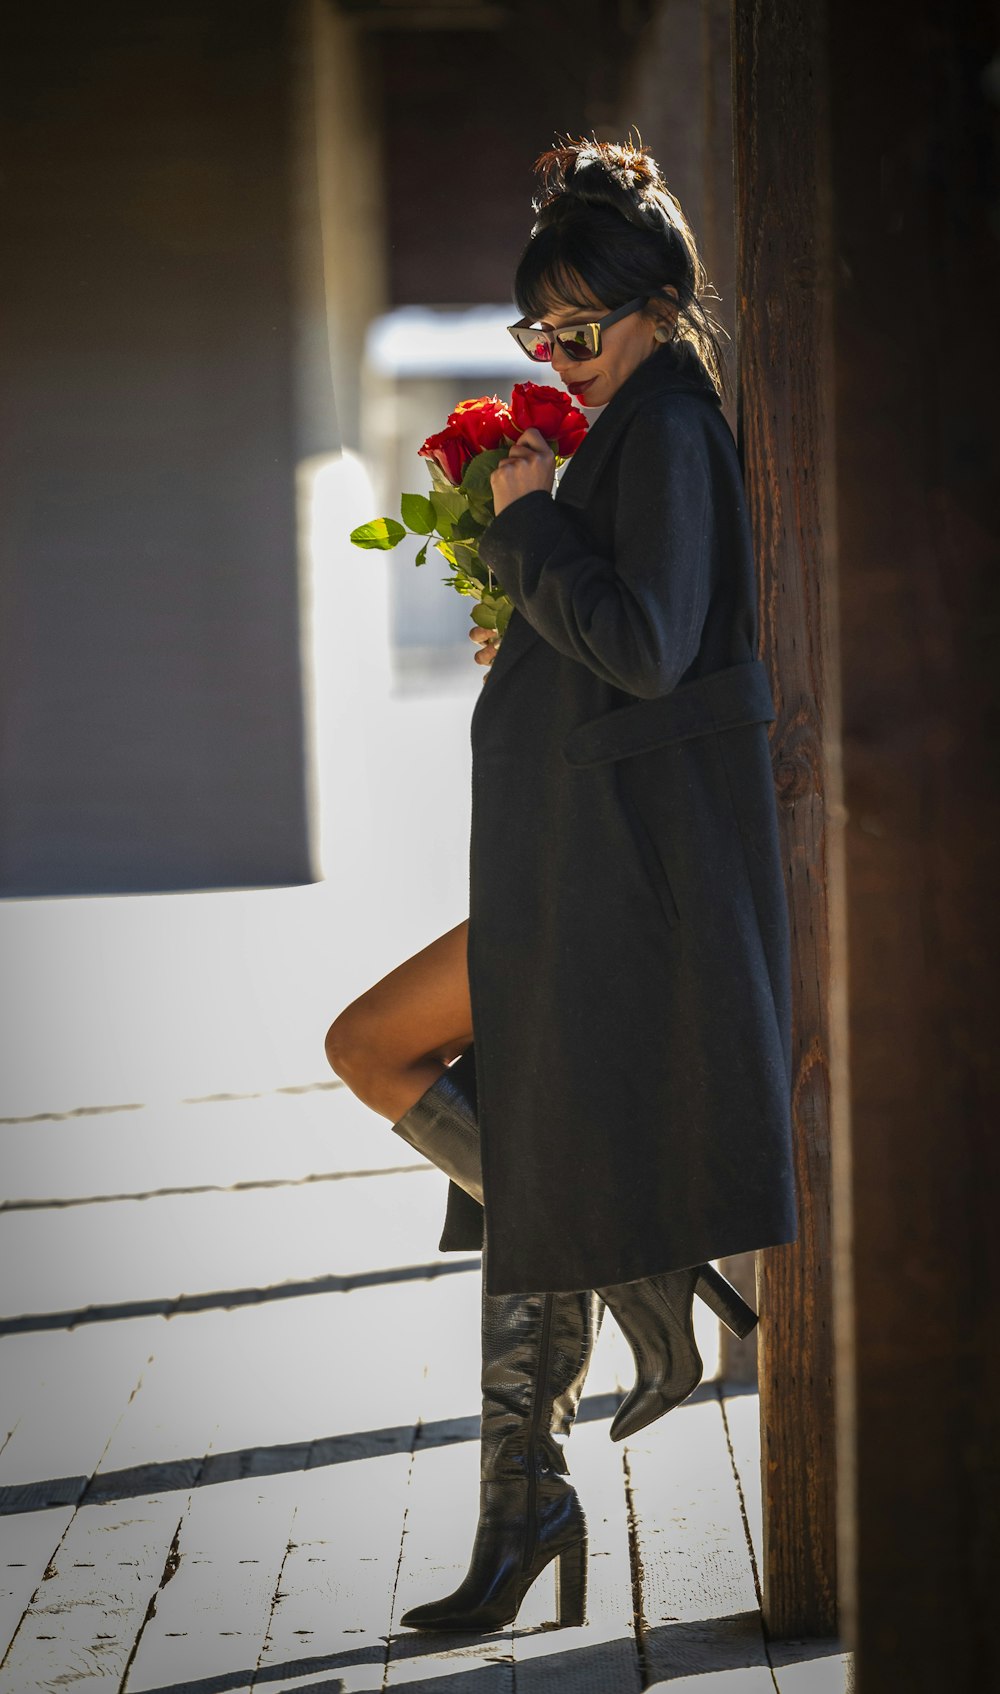 a woman in a black coat is holding flowers